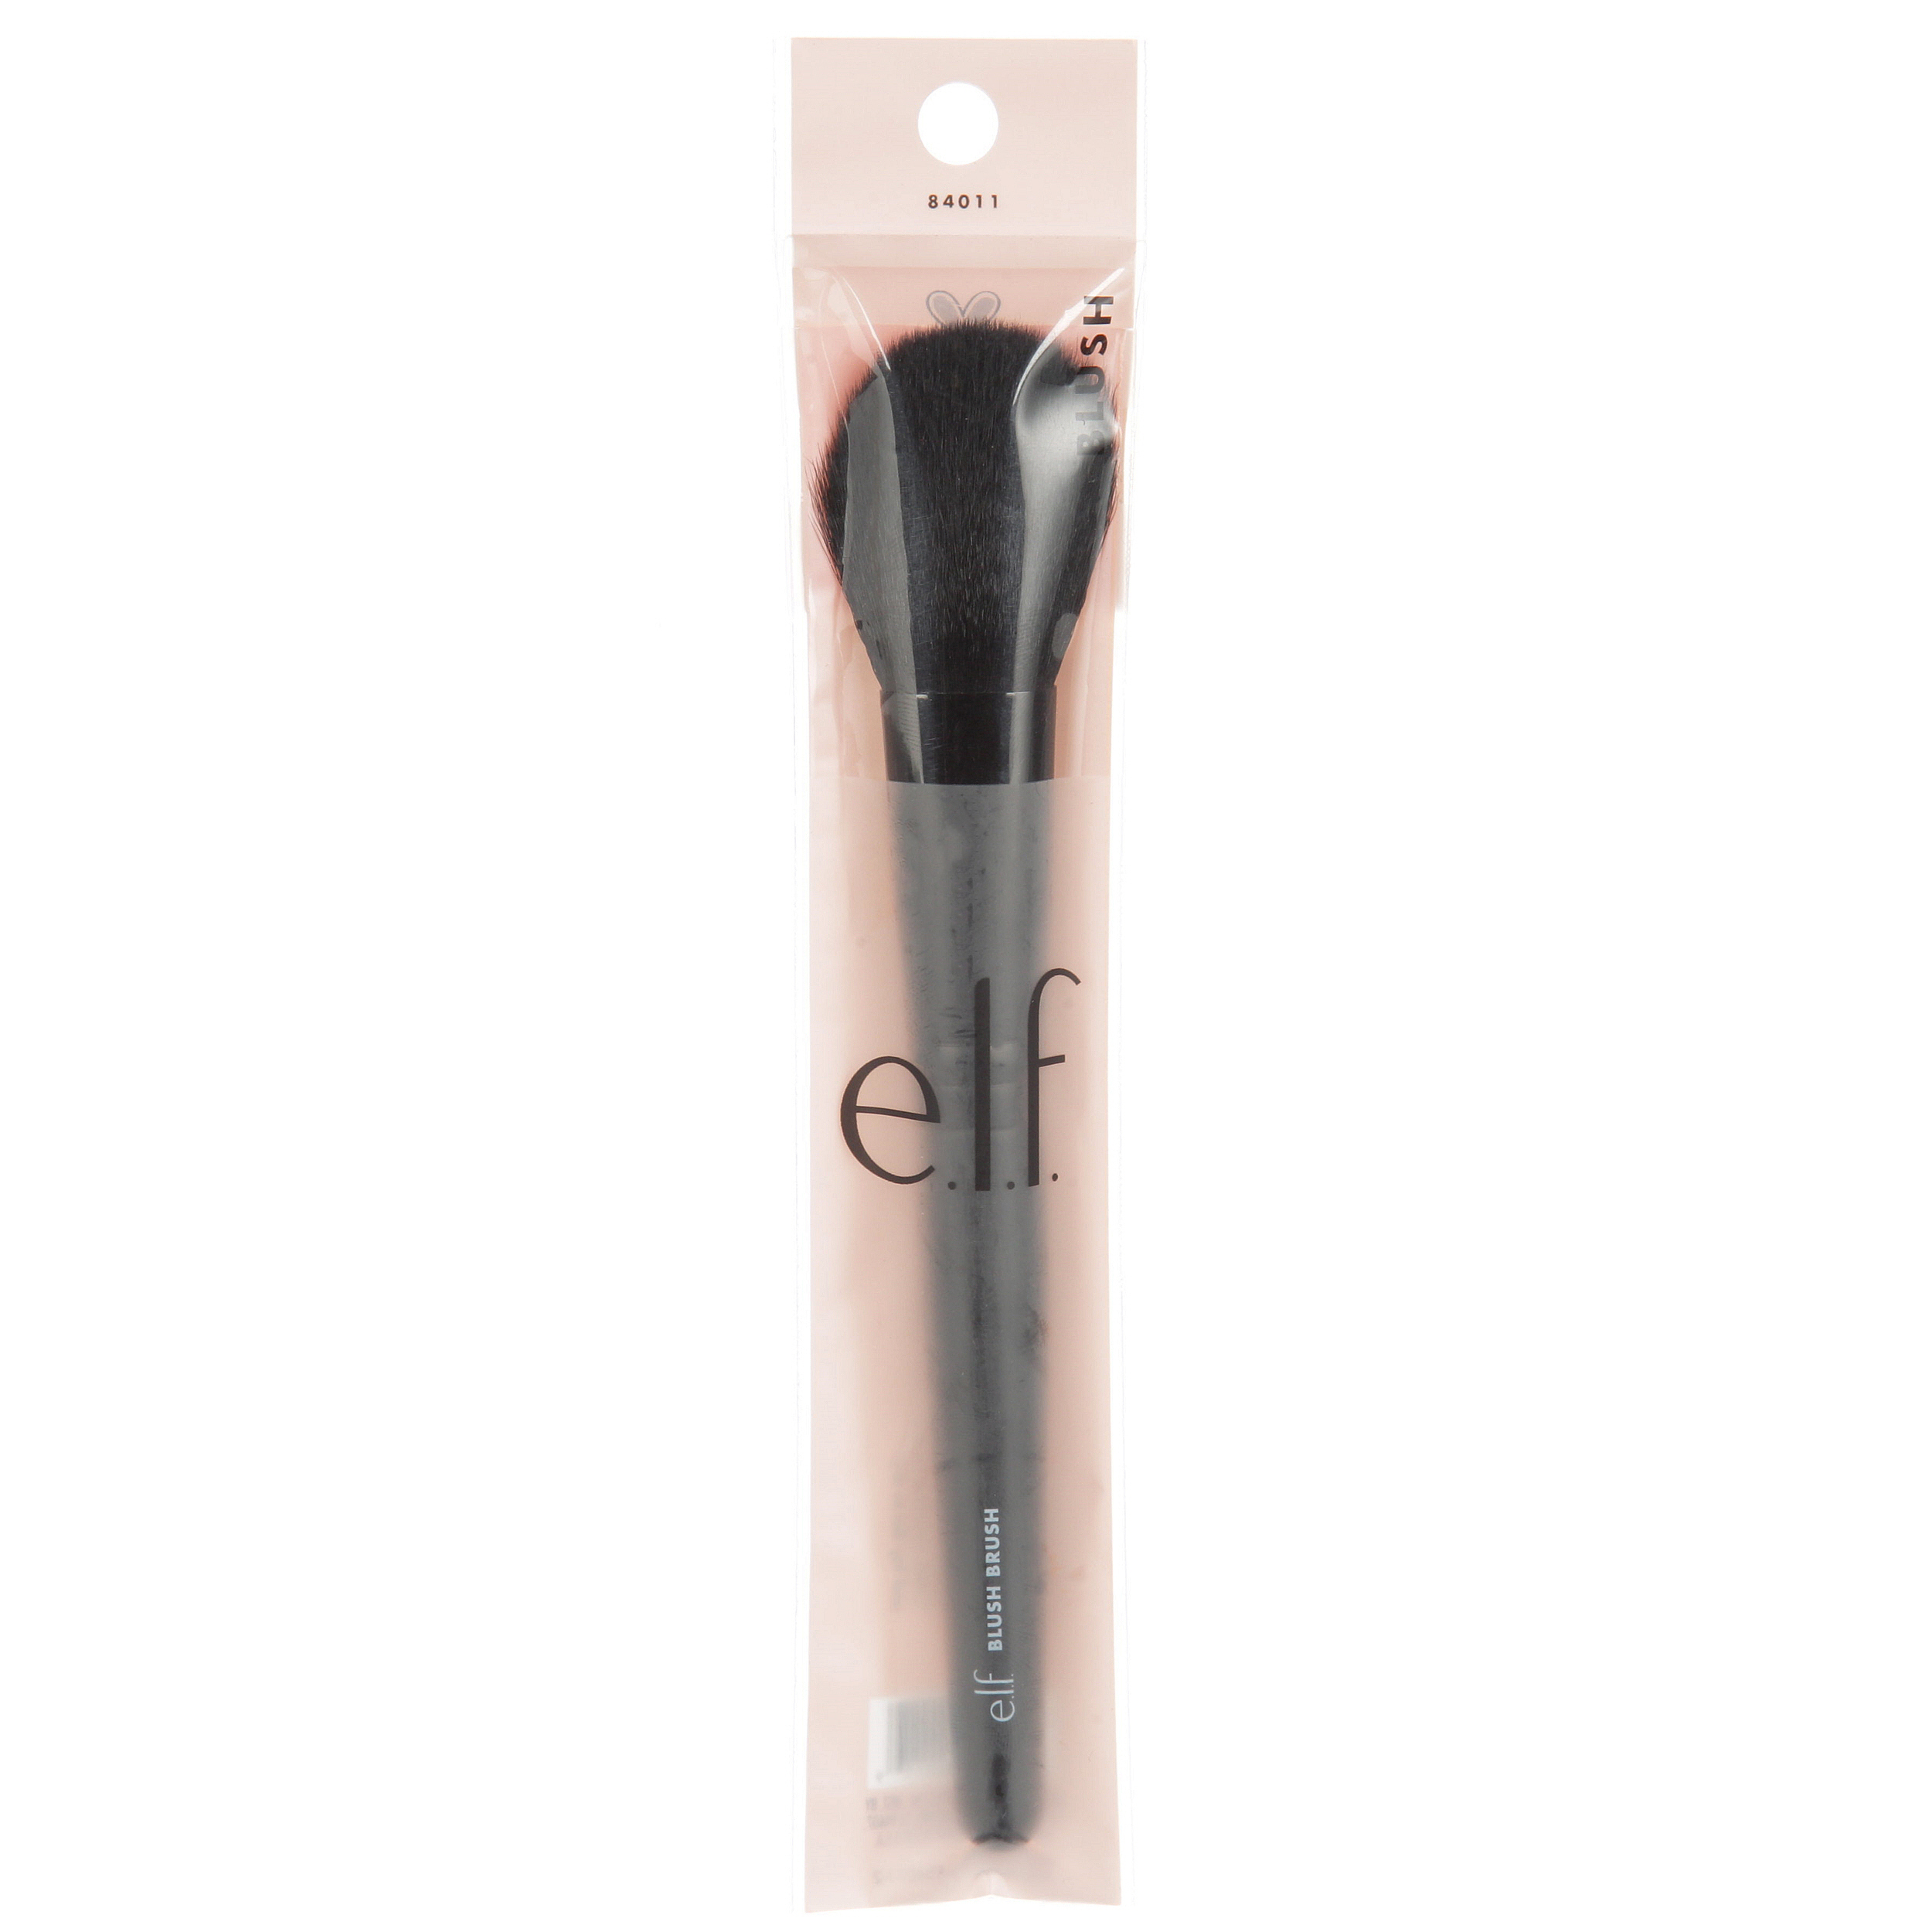 e.l.f Blush Brush for Precision Application, Synthetic - image 3 of 4